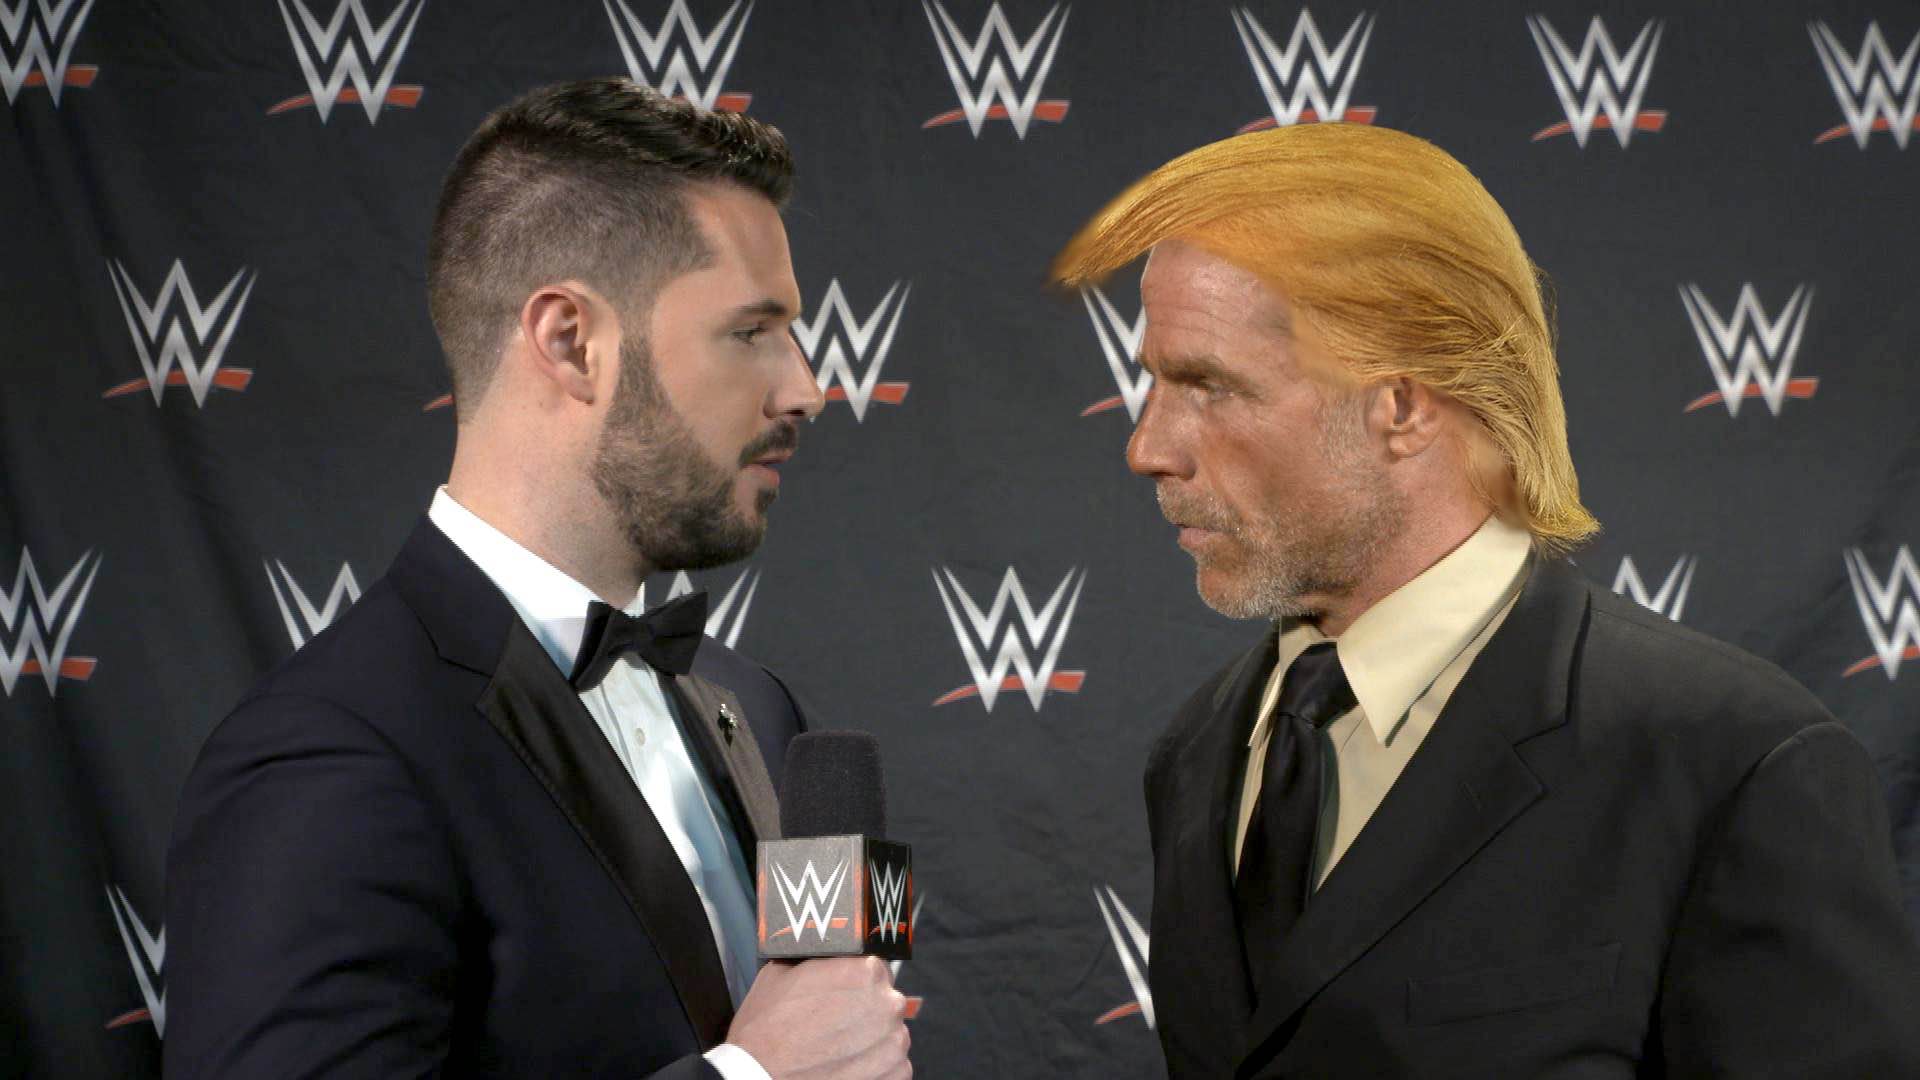 Shawn Michaels gets treatment from President's hair specialist